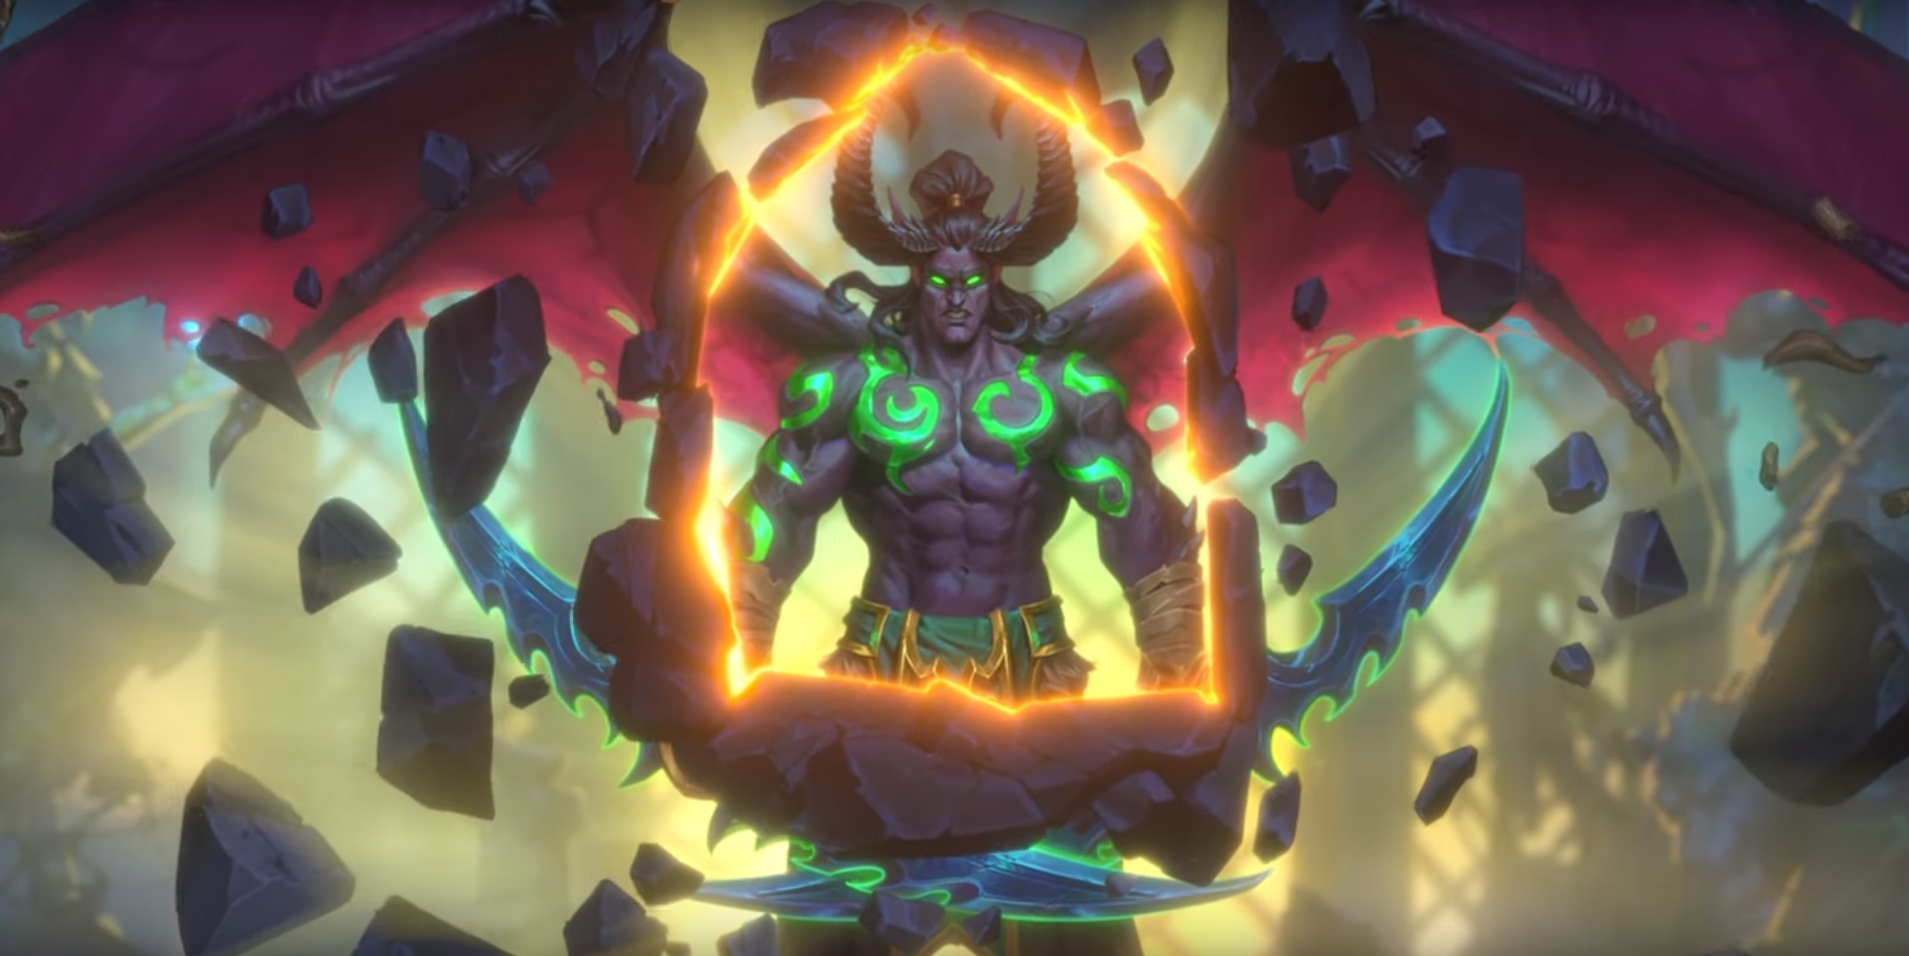 Hearthstone Announces Upcoming Demon Hunter Class, The First New Class Since Hearthstone’s Launch